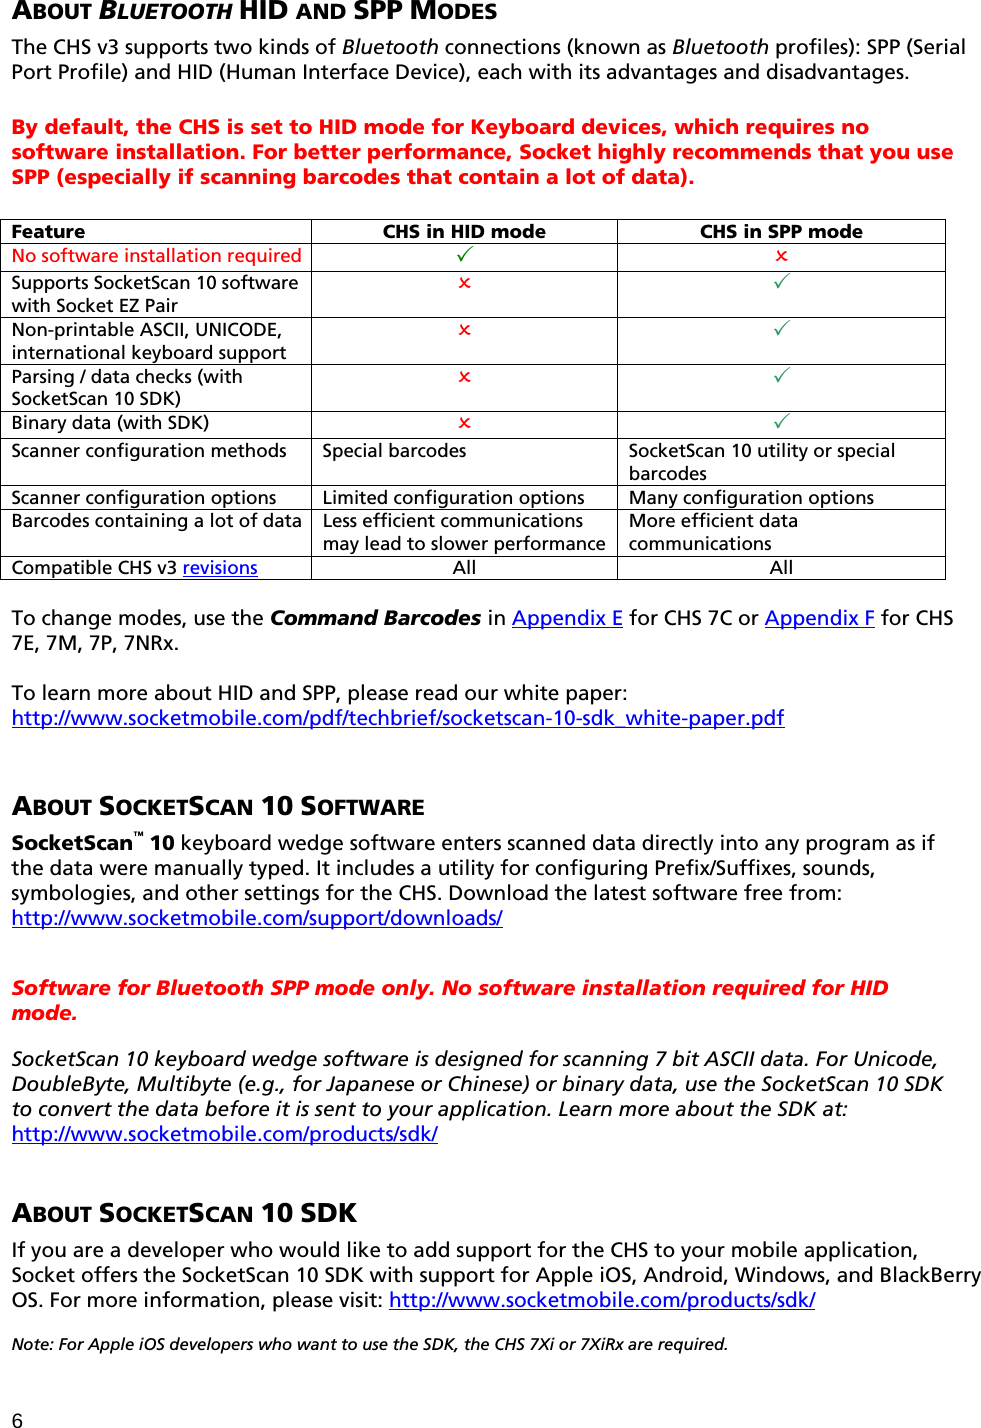 6 ABOUT BLUETOOTH HID AND SPP MODES  The CHS v3 supports two kinds of Bluetooth connections (known as Bluetooth profiles): SPP (Serial Port Profile) and HID (Human Interface Device), each with its advantages and disadvantages.   By default, the CHS is set to HID mode for Keyboard devices, which requires no software installation. For better performance, Socket highly recommends that you use SPP (especially if scanning barcodes that contain a lot of data).  Feature  CHS in HID mode  CHS in SPP mode No software installation required    Supports SocketScan 10 software with Socket EZ Pair   Non-printable ASCII, UNICODE, international keyboard support   Parsing / data checks (with SocketScan 10 SDK)   Binary data (with SDK)    Scanner configuration methods Special barcodes  SocketScan 10 utility or special barcodes Scanner configuration options Limited configuration options  Many configuration options Barcodes containing a lot of data  Less efficient communications may lead to slower performance More efficient data communications Compatible CHS v3 revisions All  All  To change modes, use the Command Barcodes in Appendix E for CHS 7C or Appendix F for CHS 7E, 7M, 7P, 7NRx.   To learn more about HID and SPP, please read our white paper: http://www.socketmobile.com/pdf/techbrief/socketscan-10-sdk_white-paper.pdf    ABOUT SOCKETSCAN 10 SOFTWARE  SocketScan™ 10 keyboard wedge software enters scanned data directly into any program as if the data were manually typed. It includes a utility for configuring Prefix/Suffixes, sounds, symbologies, and other settings for the CHS. Download the latest software free from: http://www.socketmobile.com/support/downloads/   Software for Bluetooth SPP mode only. No software installation required for HID mode.  SocketScan 10 keyboard wedge software is designed for scanning 7 bit ASCII data. For Unicode, DoubleByte, Multibyte (e.g., for Japanese or Chinese) or binary data, use the SocketScan 10 SDK to convert the data before it is sent to your application. Learn more about the SDK at: http://www.socketmobile.com/products/sdk/   ABOUT SOCKETSCAN 10 SDK  If you are a developer who would like to add support for the CHS to your mobile application, Socket offers the SocketScan 10 SDK with support for Apple iOS, Android, Windows, and BlackBerry OS. For more information, please visit: http://www.socketmobile.com/products/sdk/  Note: For Apple iOS developers who want to use the SDK, the CHS 7Xi or 7XiRx are required. 